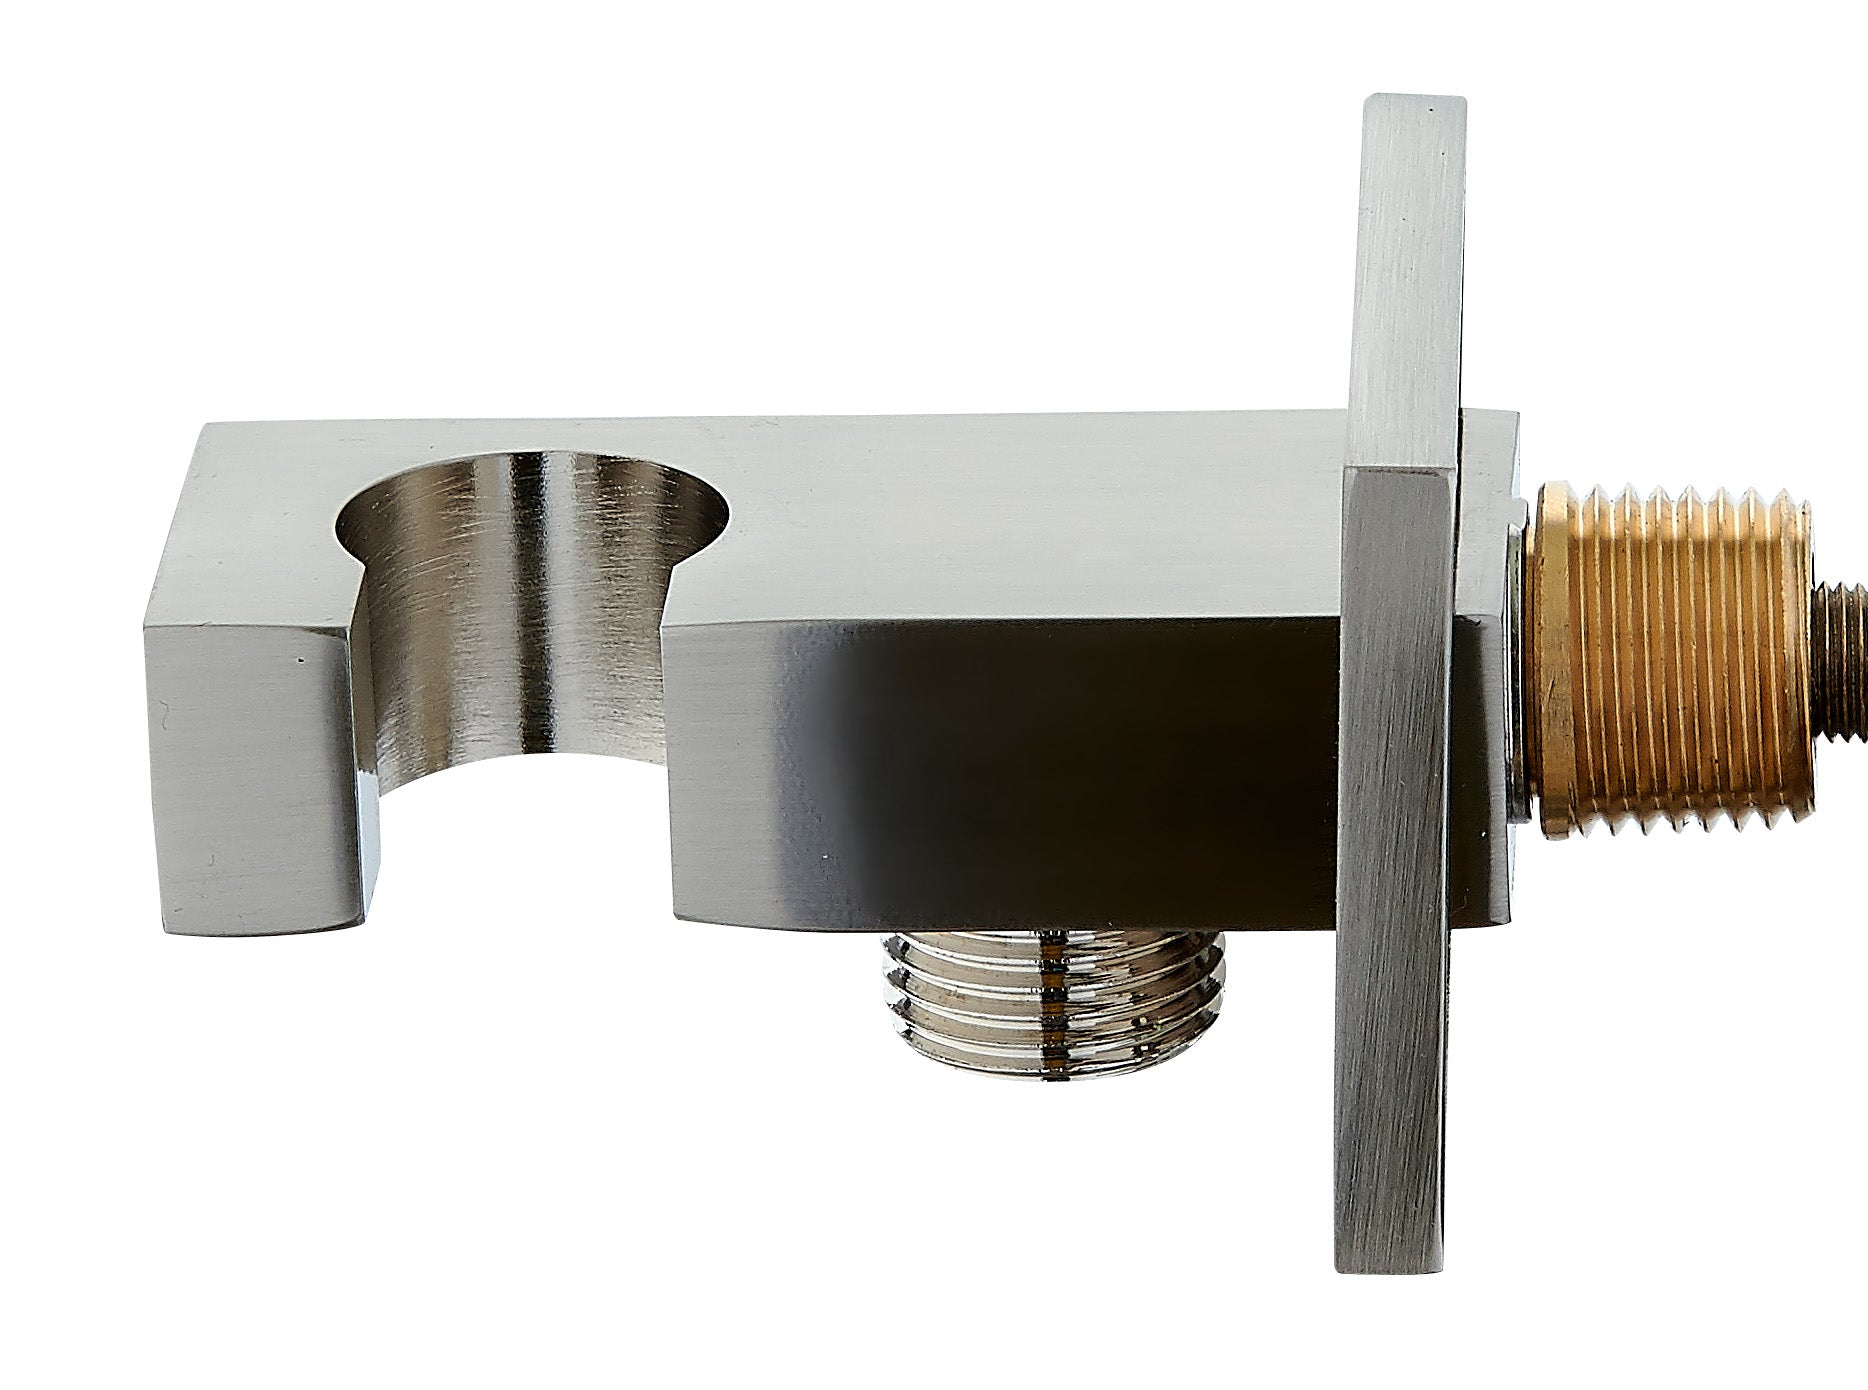 Dax Brass Square Hand Shower Holder With Hose Connector Brushed Nickel Finish (DAX-078-BN)